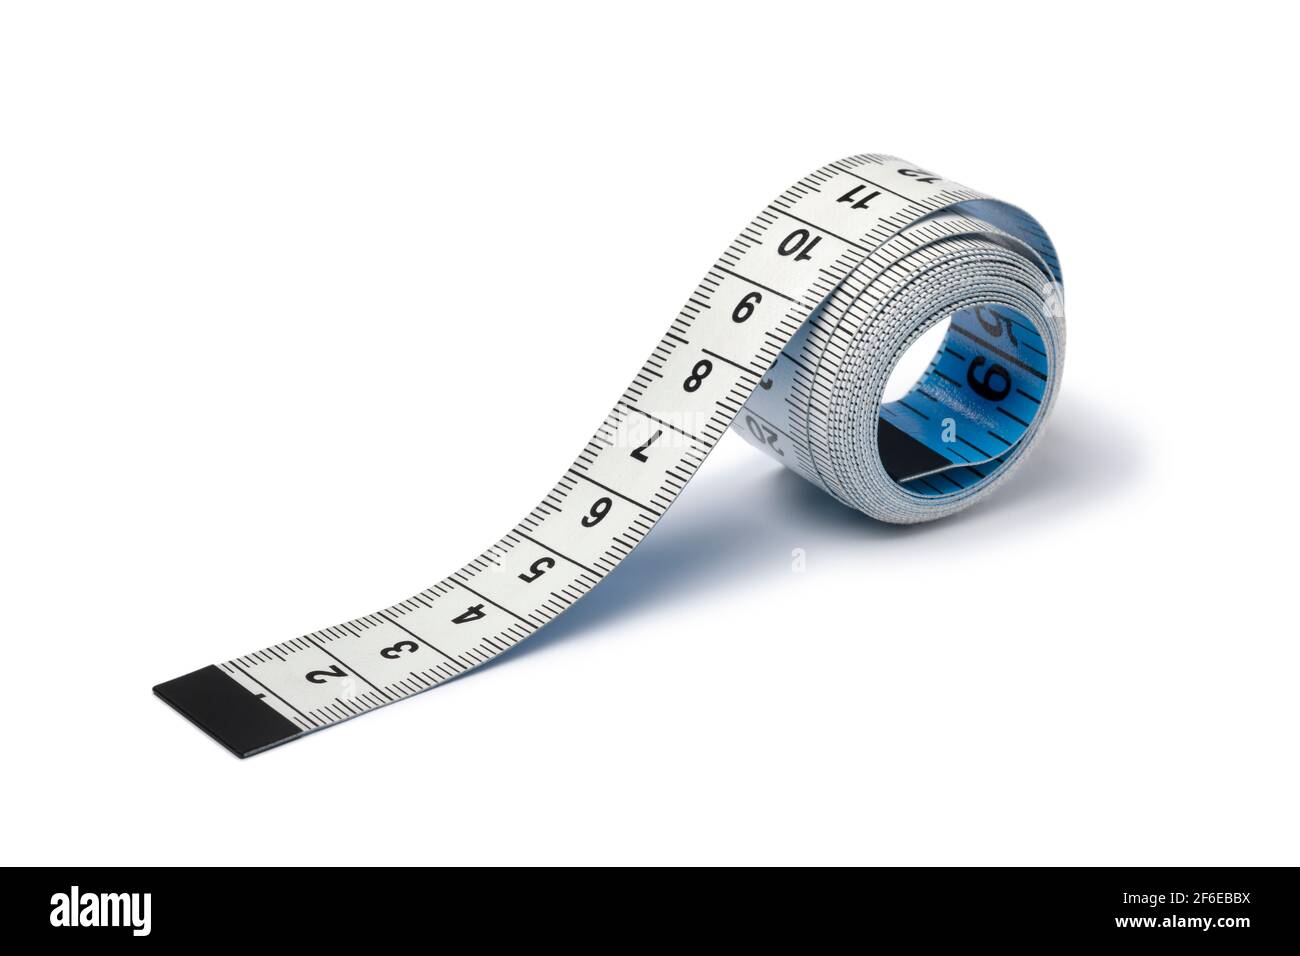 446,769 Measuring Tape Images, Stock Photos, 3D objects, & Vectors